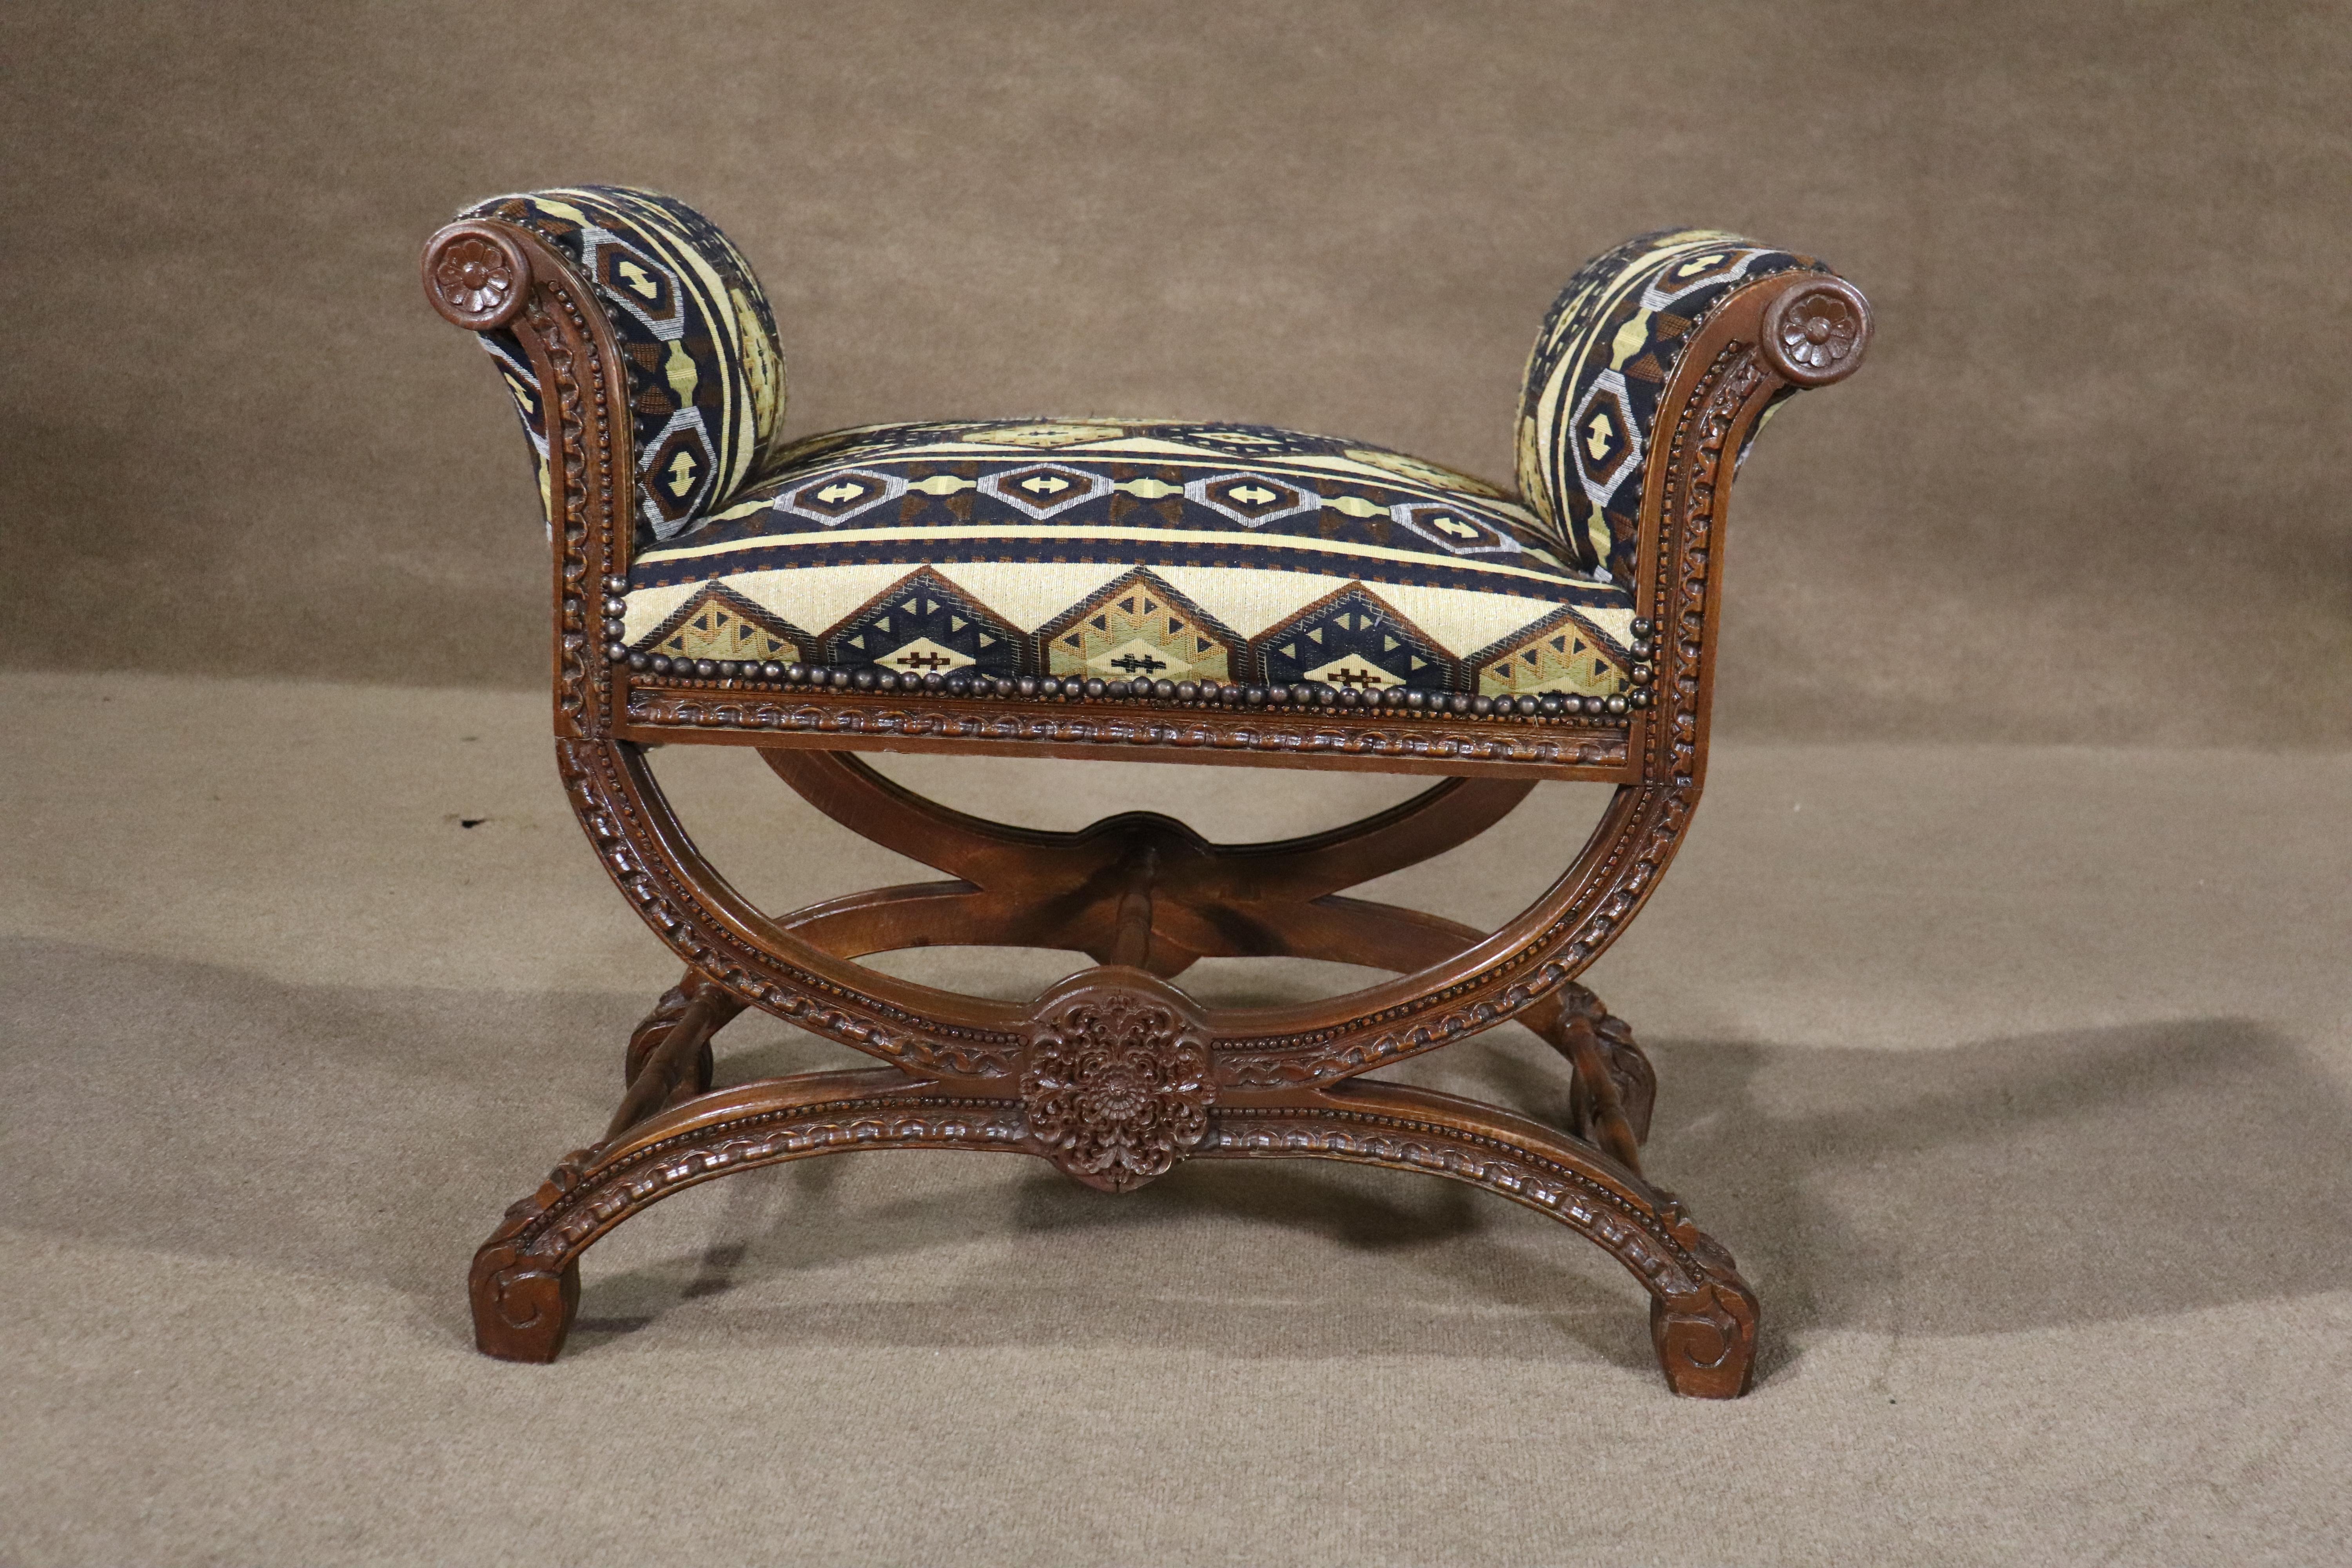 Antique carved frame bench with criss-cross base and scrolling arms. Upholstered seat and arms, with hand carved embellishments throughout.
Please confirm location NY or NJ